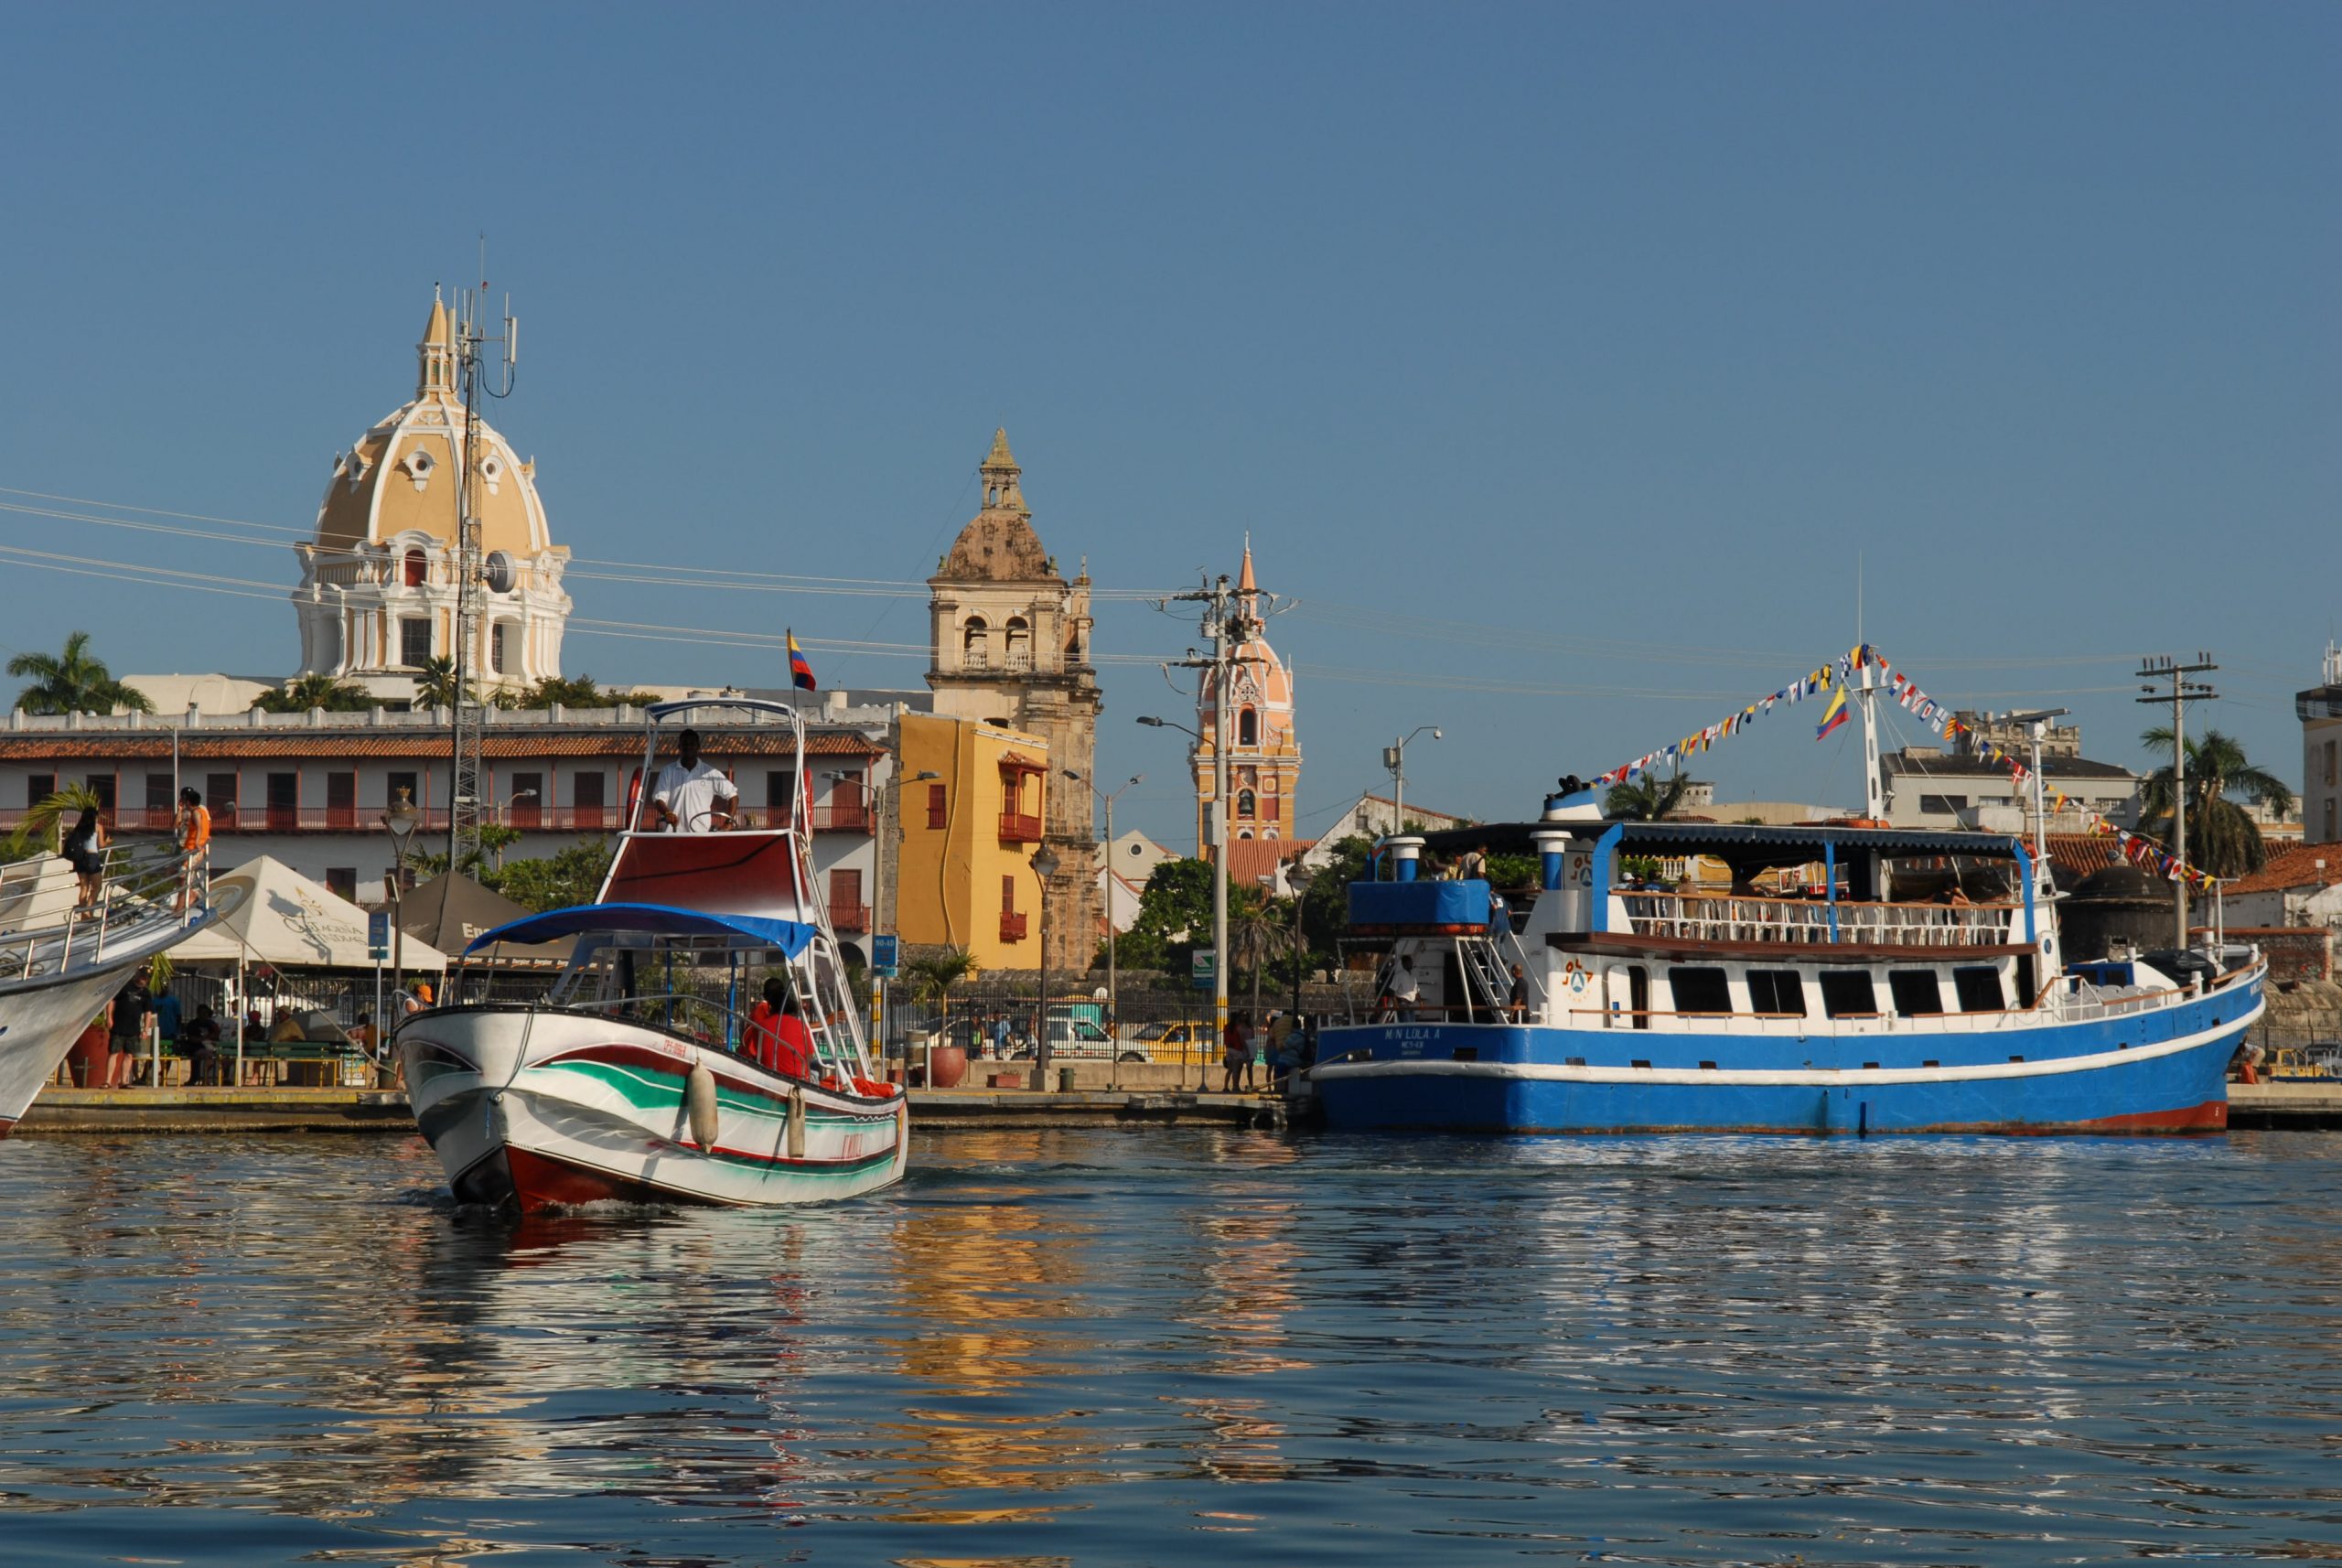 Old port of Cartagena, Colombia